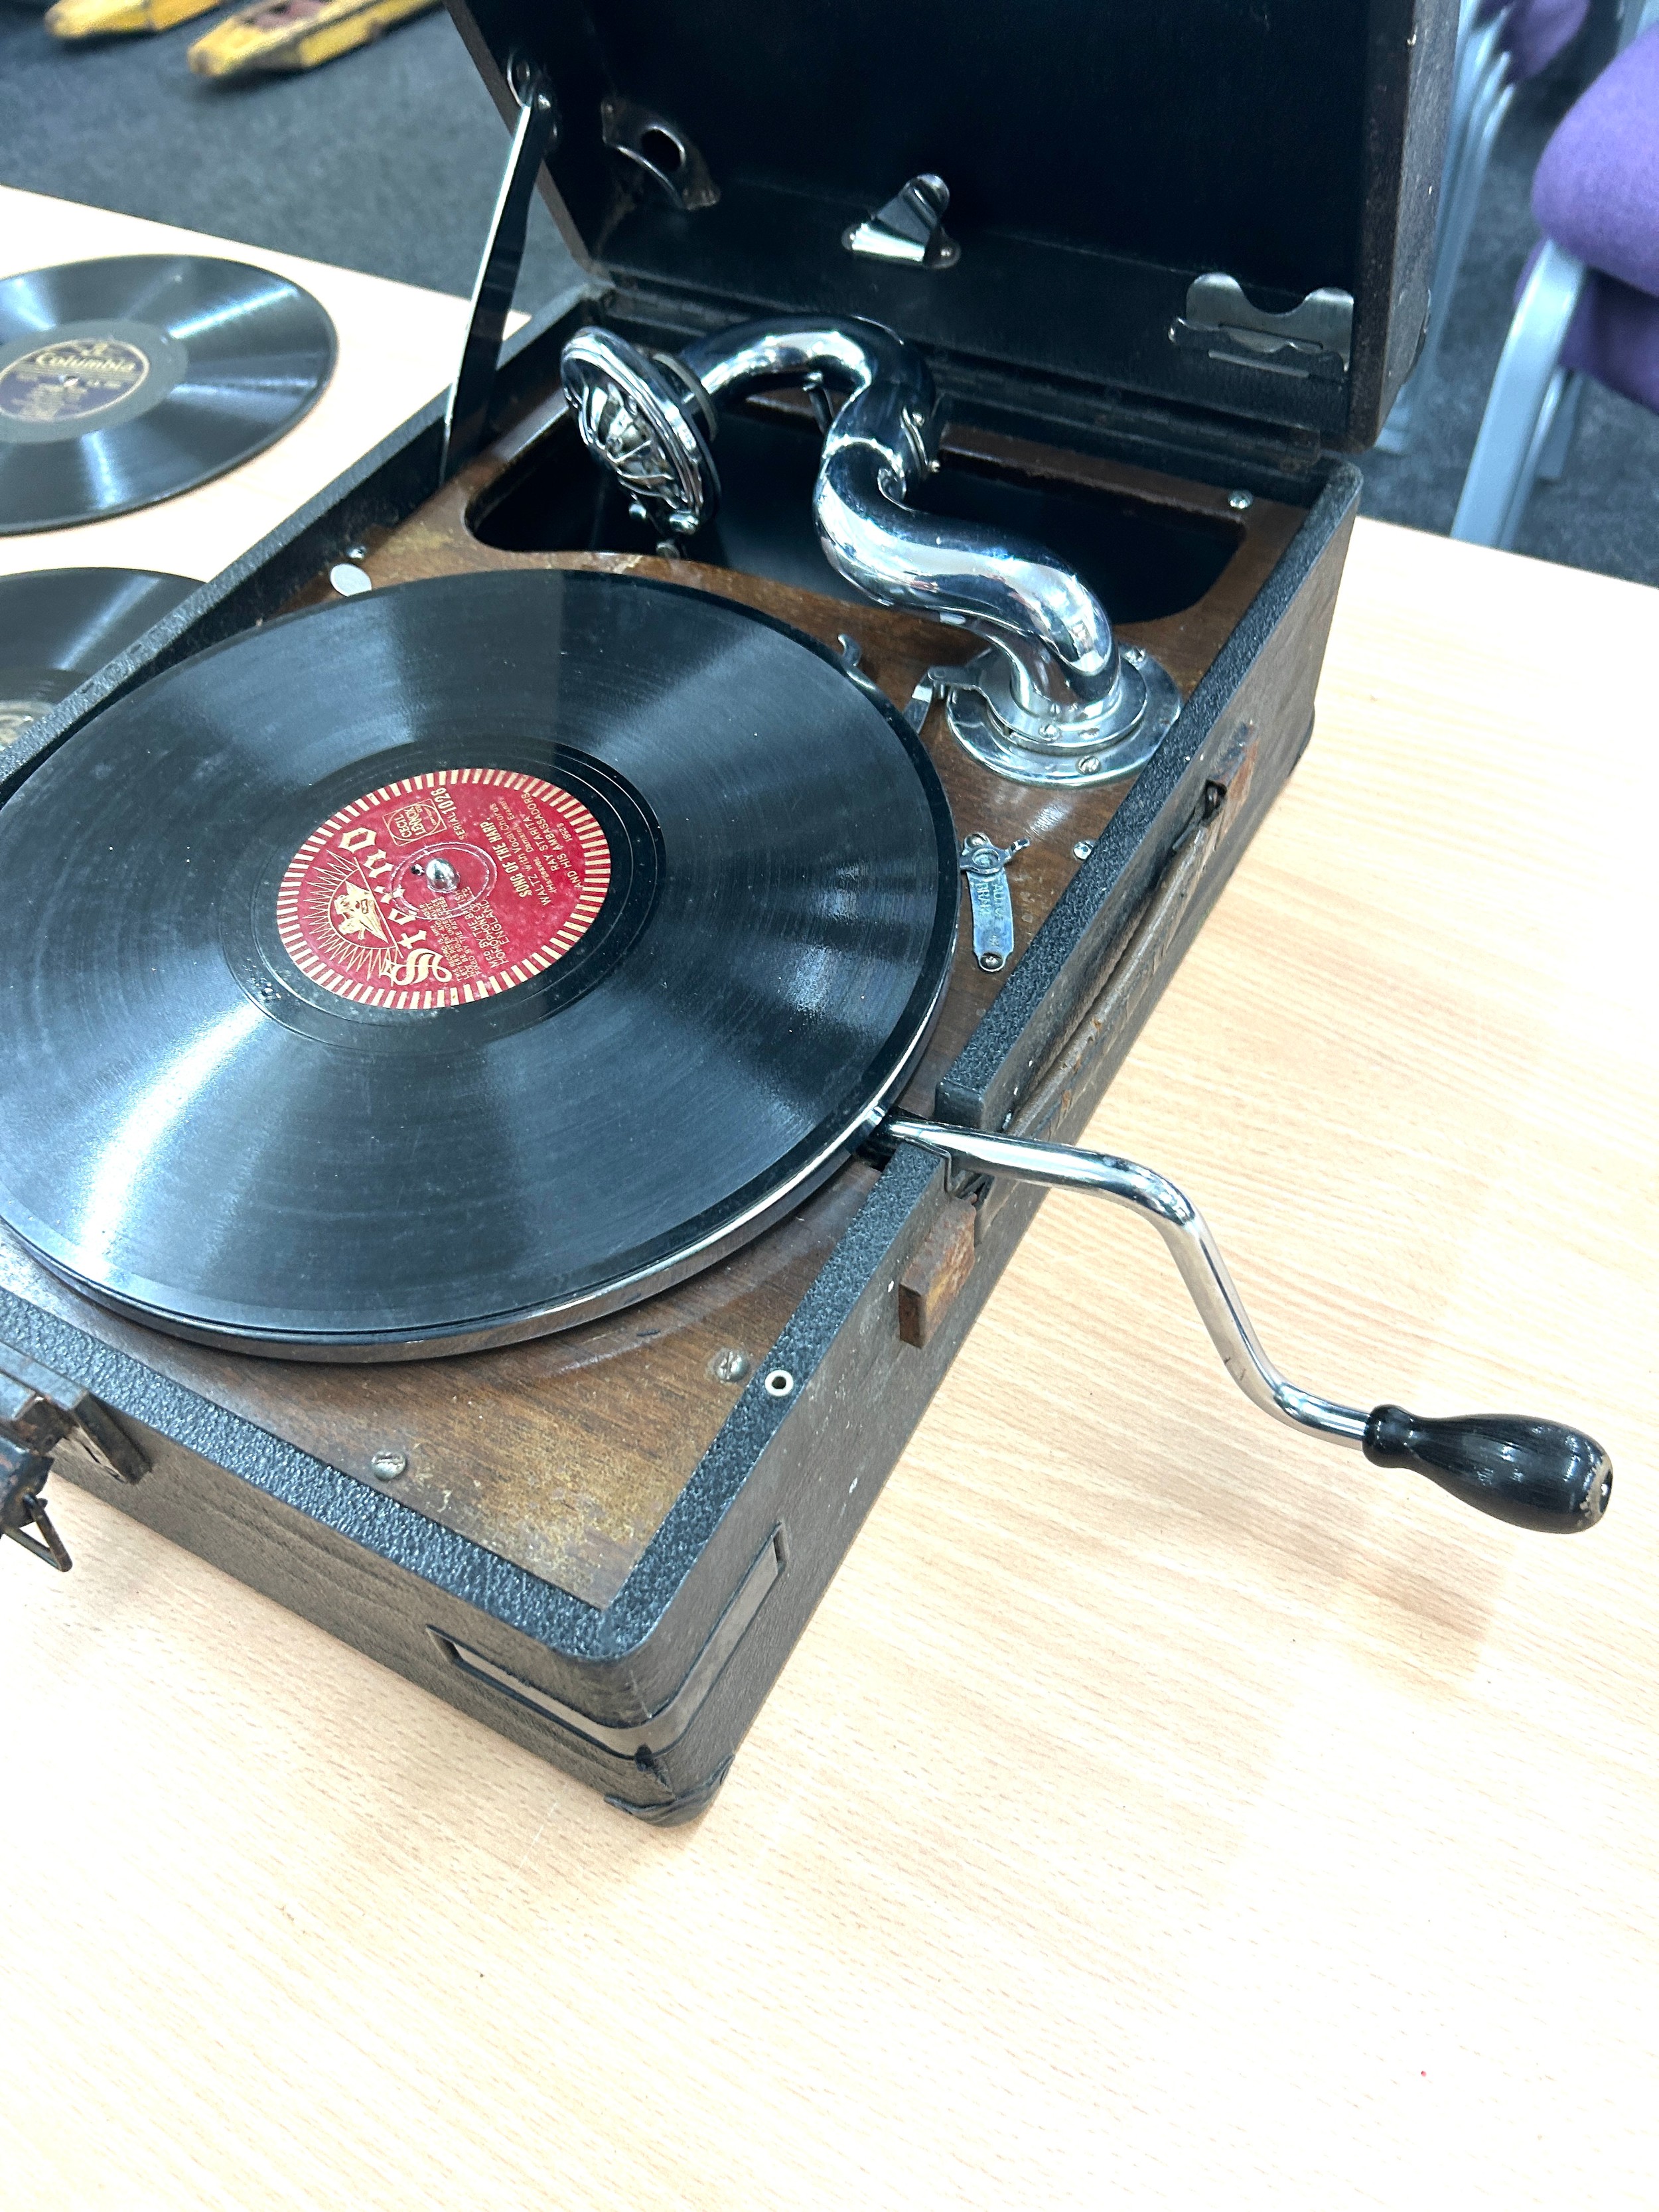 His Master's Voice grammar phone and a selection of shellac records - Image 4 of 5